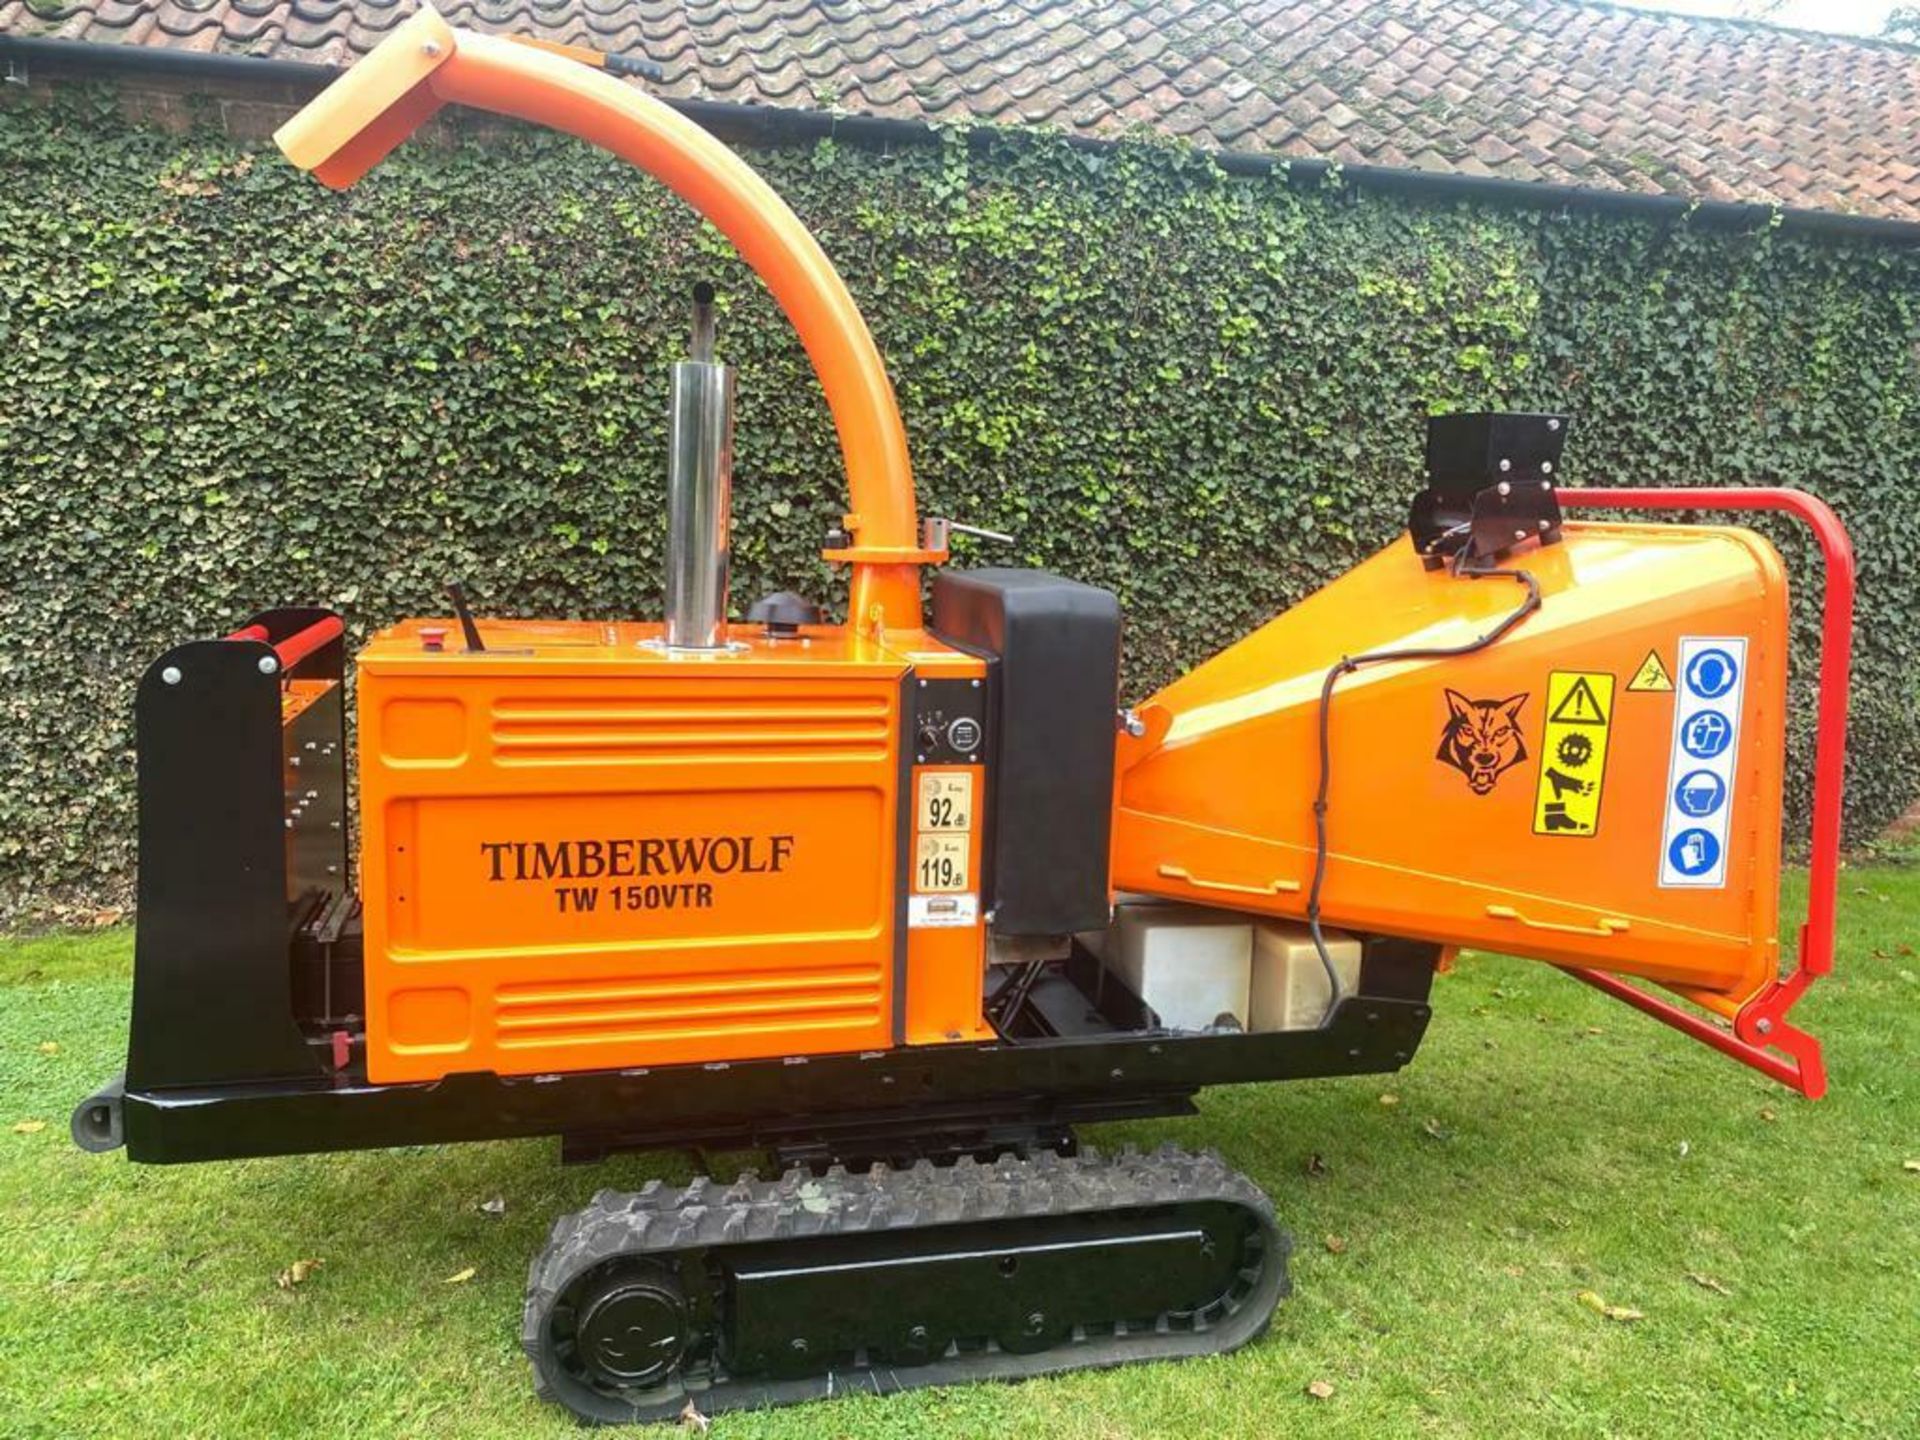 TIMBERWOLF TW 150VTR TRACKED WOOD CHIPPER, KUBOTA DIESEL ENGINE, ONLY 777 HOURS, EXPANDING TRACKS - Image 10 of 12